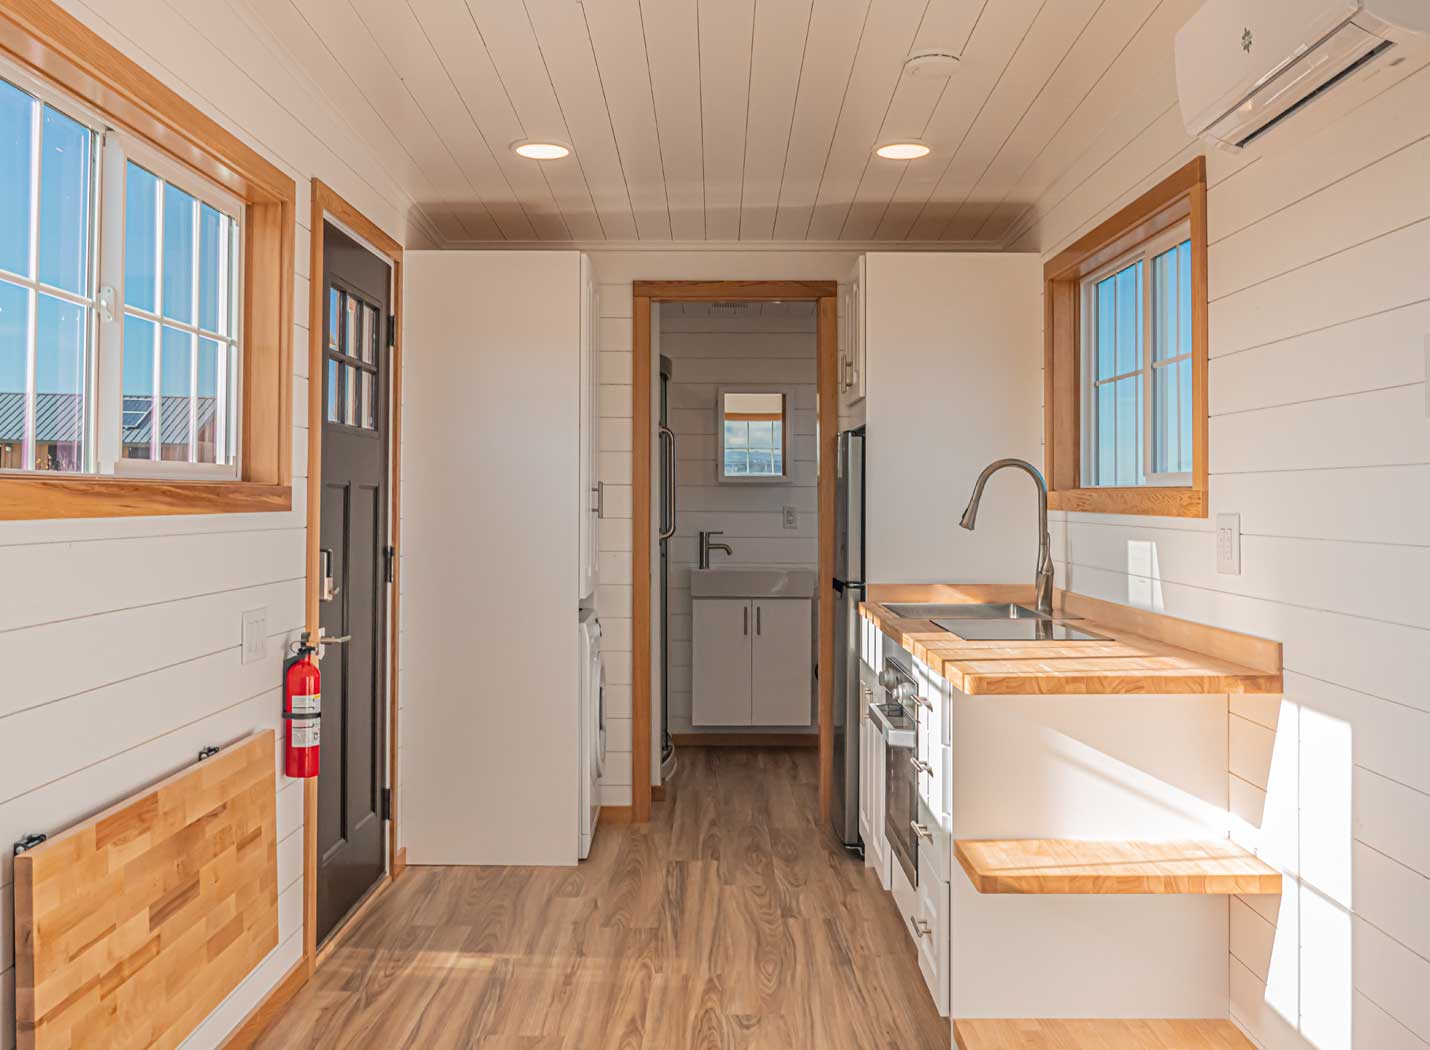 Interior of Legacy Tiny Home for sale as part of Tiny Heirloom's Signature Series tiny house models. Shows kitchen and bathroom in the craftsman style